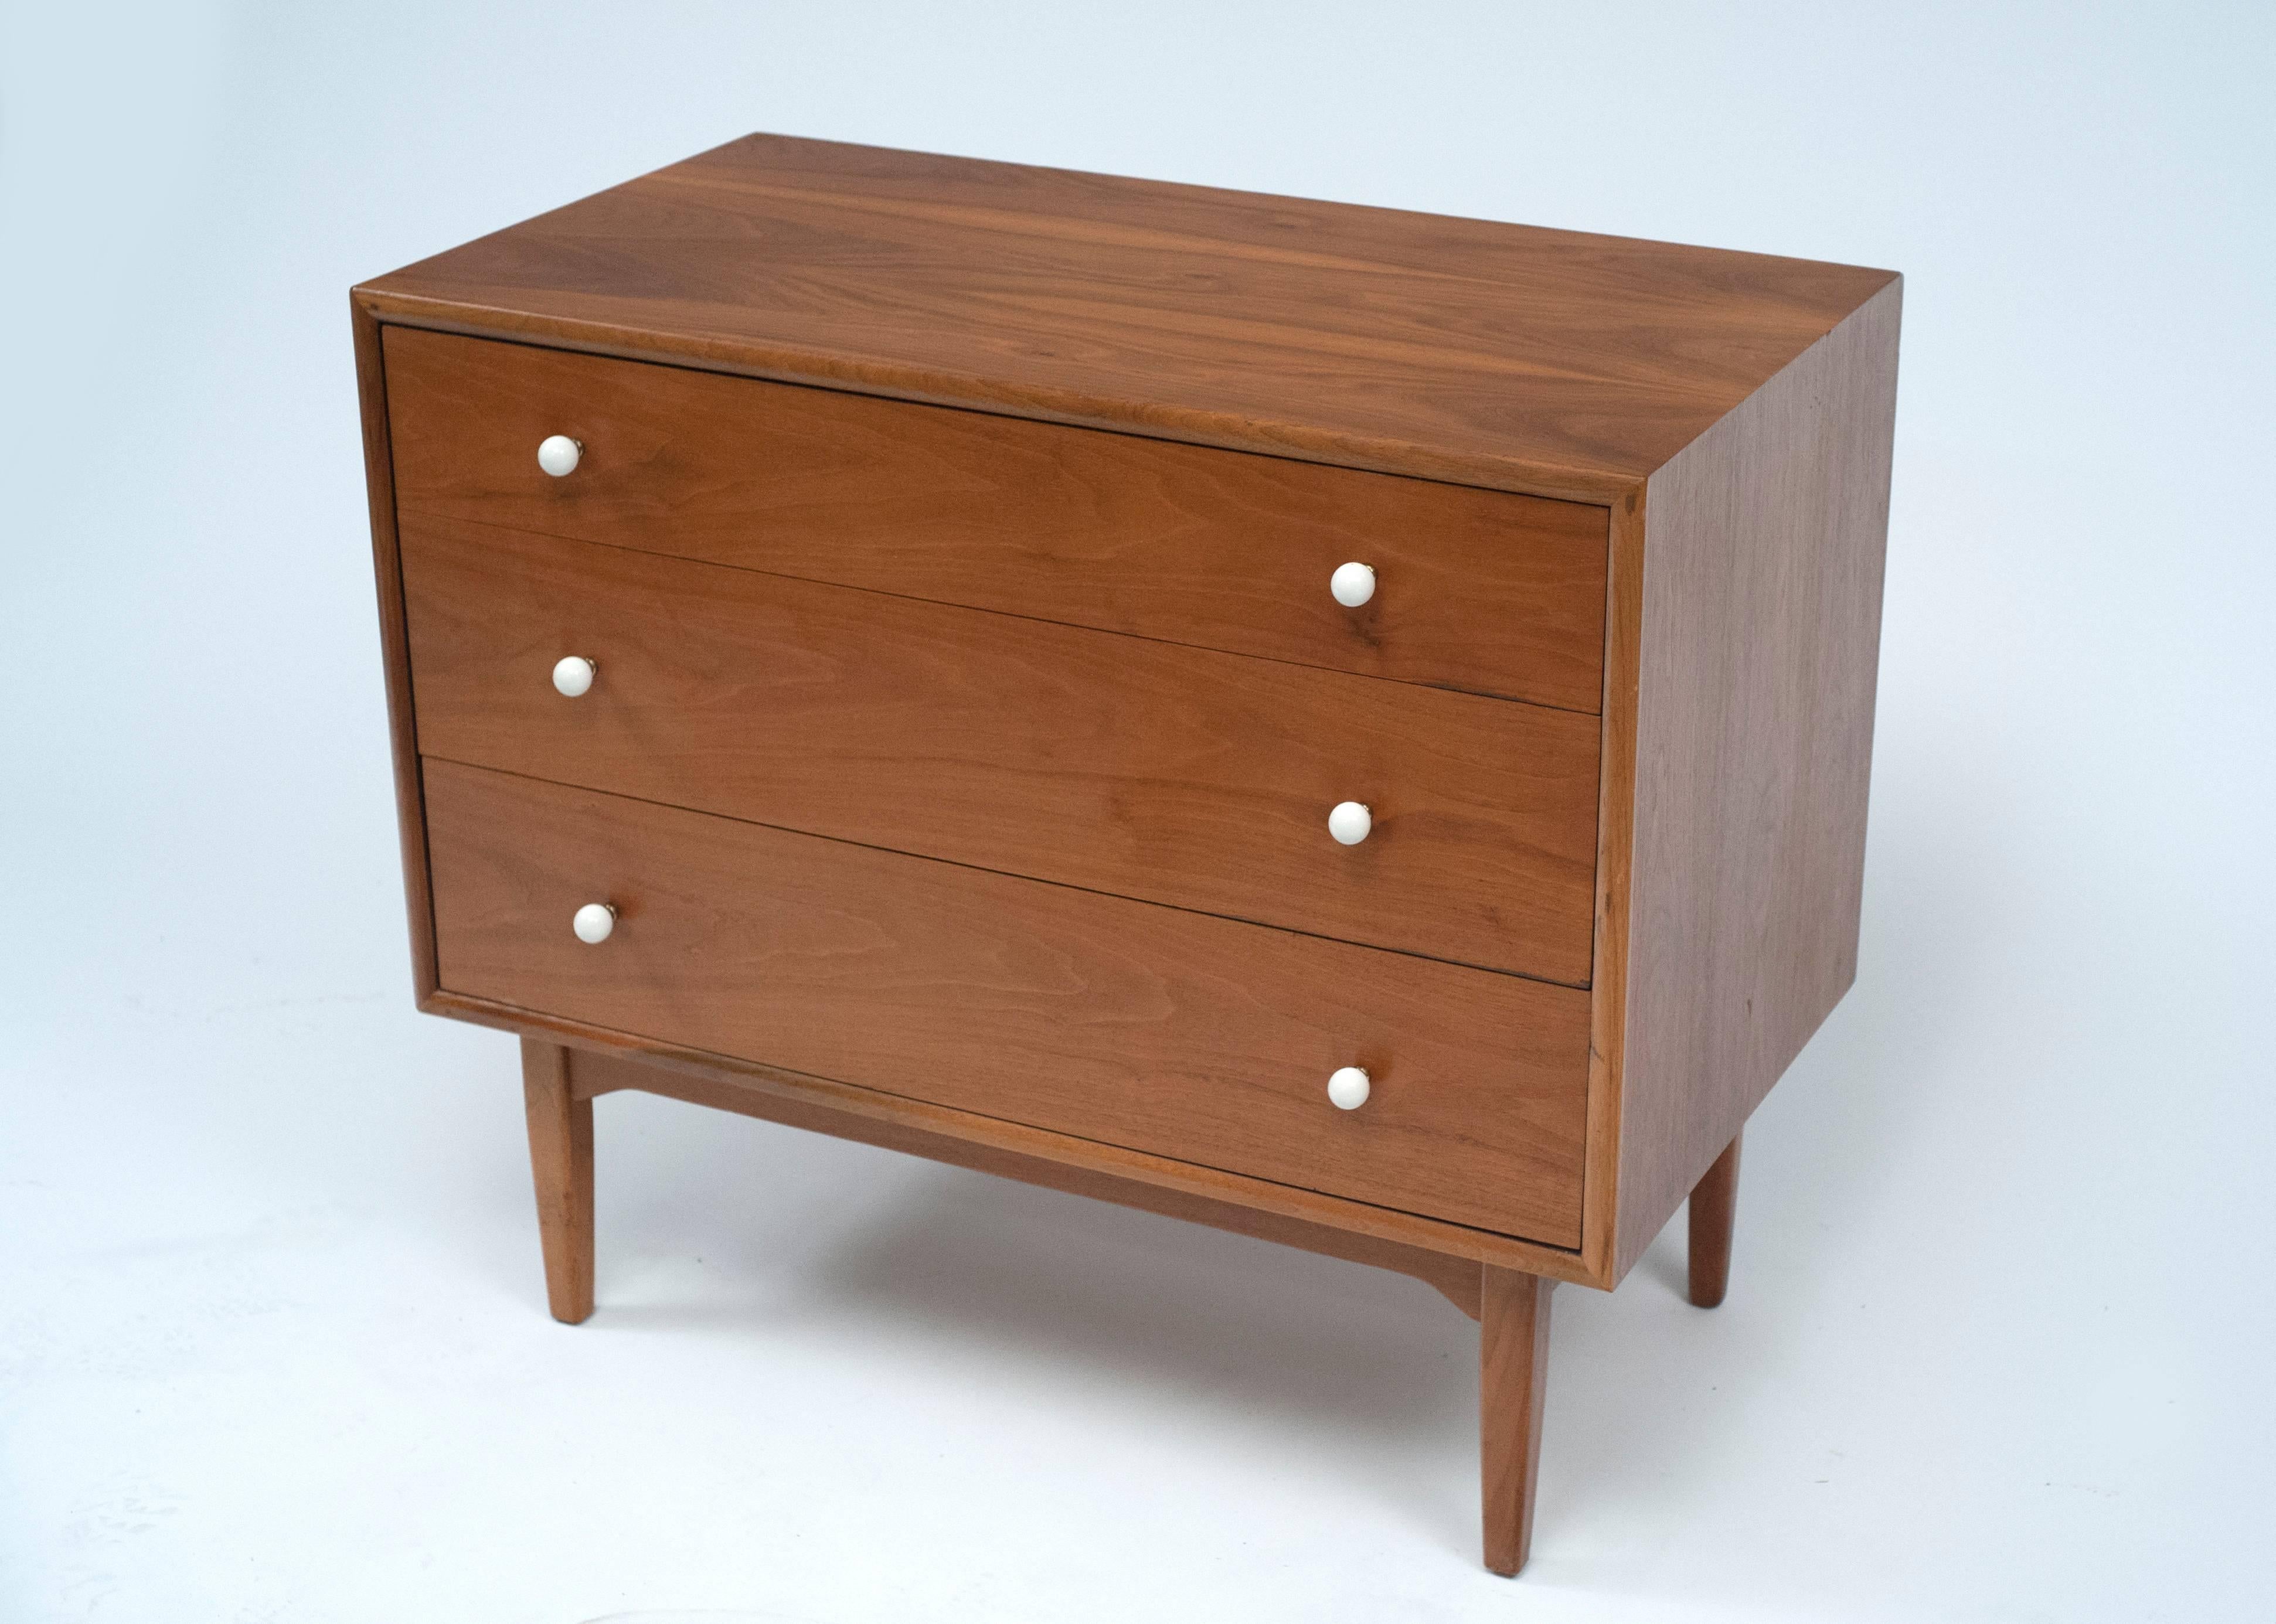 Appealing three drawer dresser by Kipp Stewart & Stewart McDougall for Drexel Furniture.  Well constructed with dovetail drawers and porcelain pulls.  